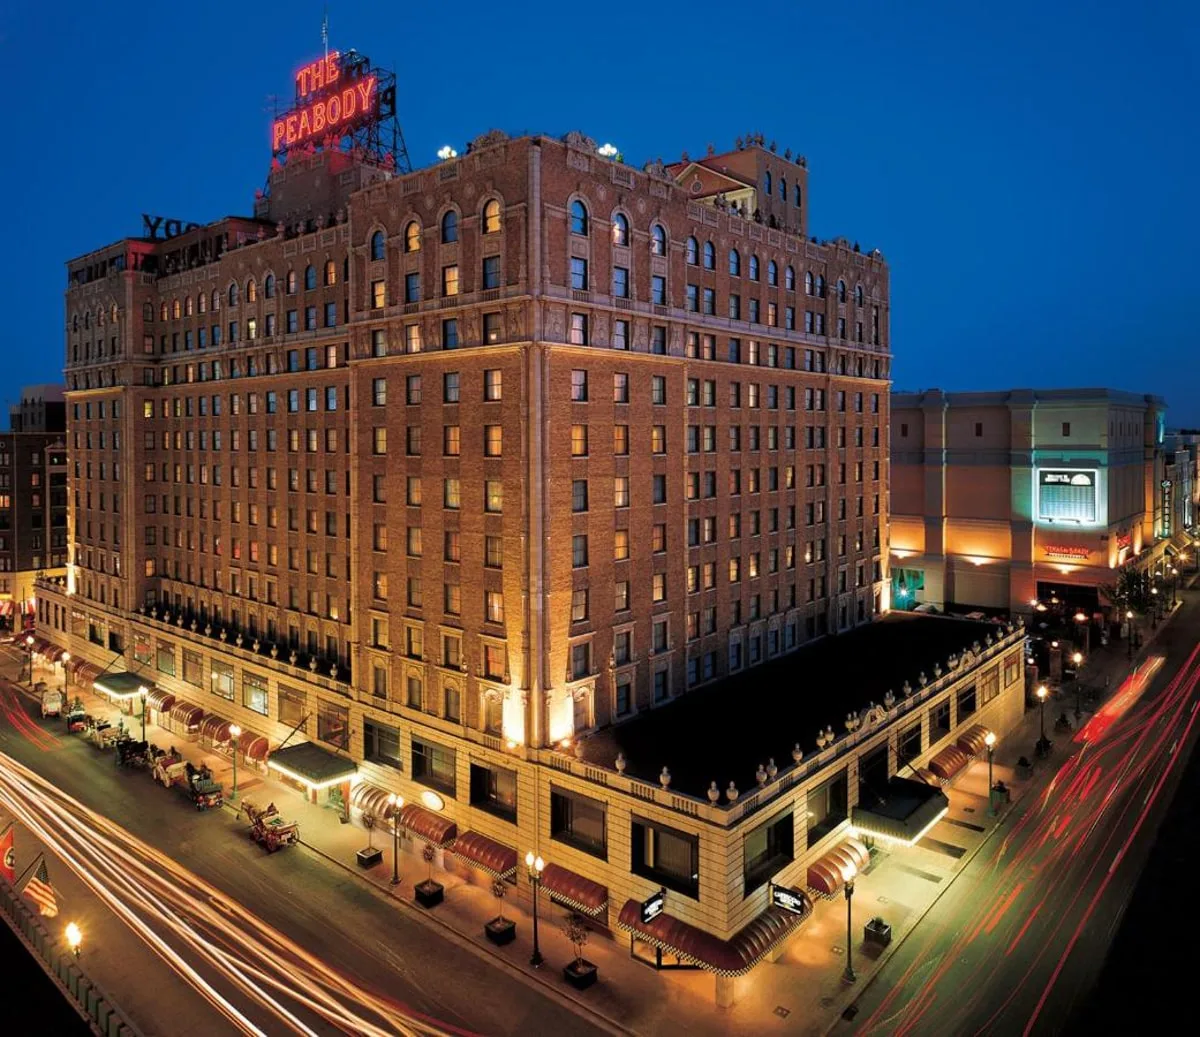 the Peabody Hotel at night in downtown Nashville